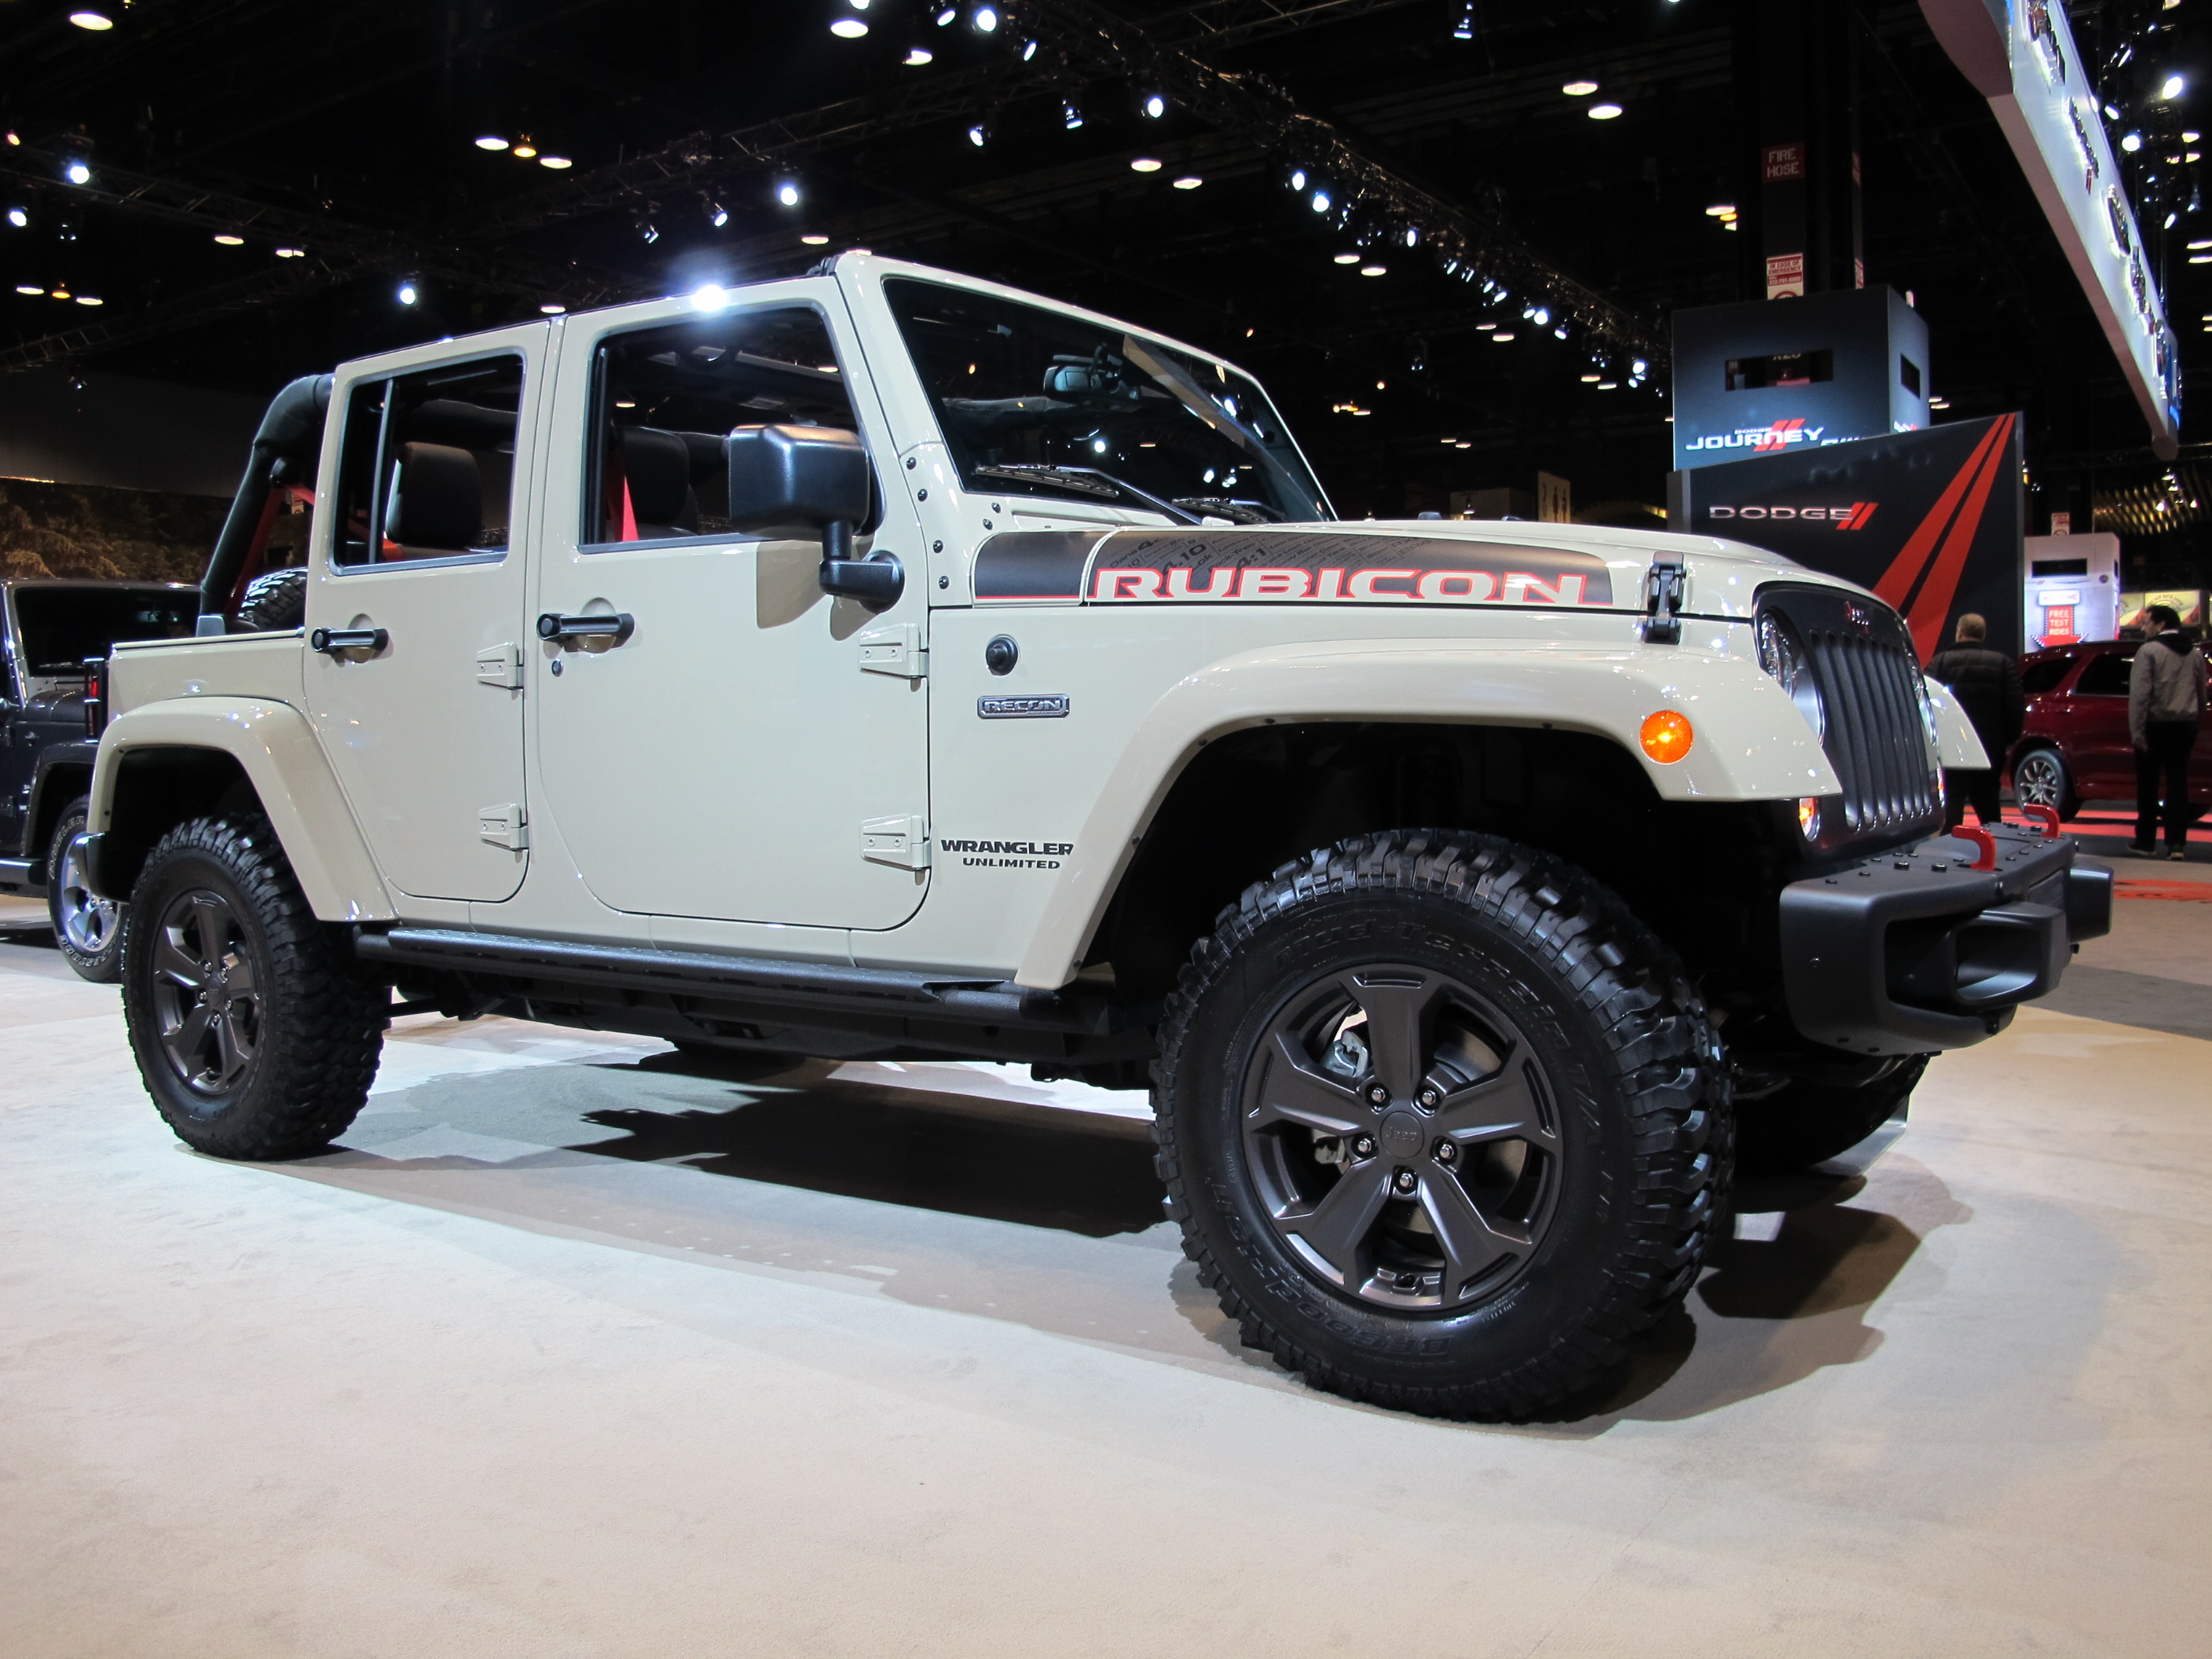 Jeep beefs up Wrangler Rubicon with new Recon special edition